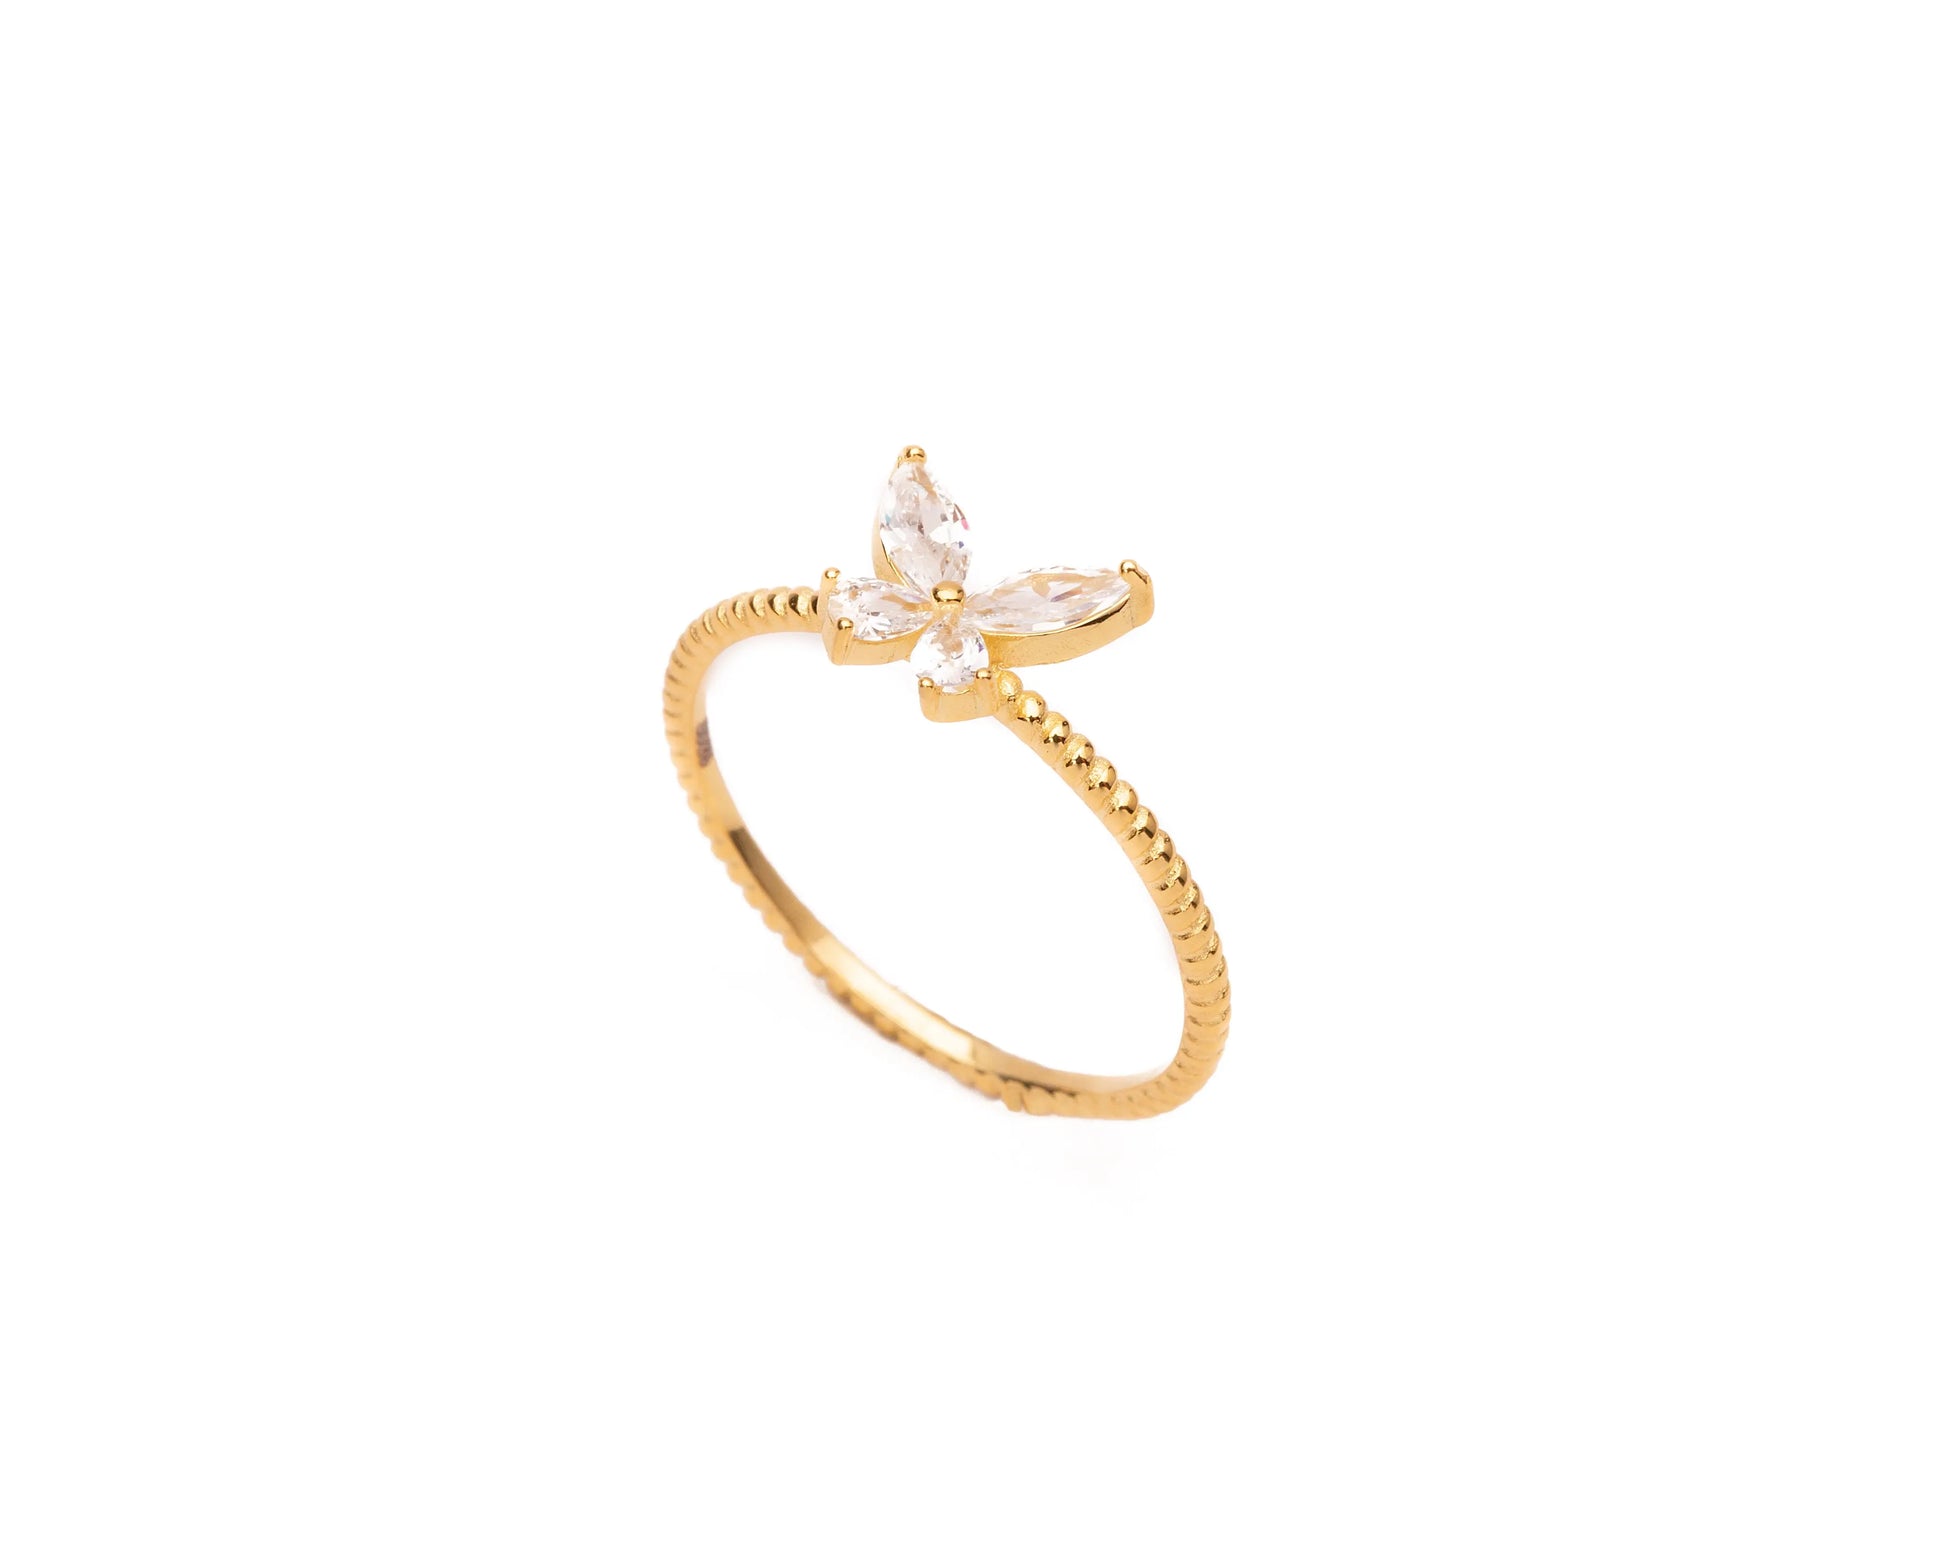 The Delicate Butterfly Ring Night Arrow